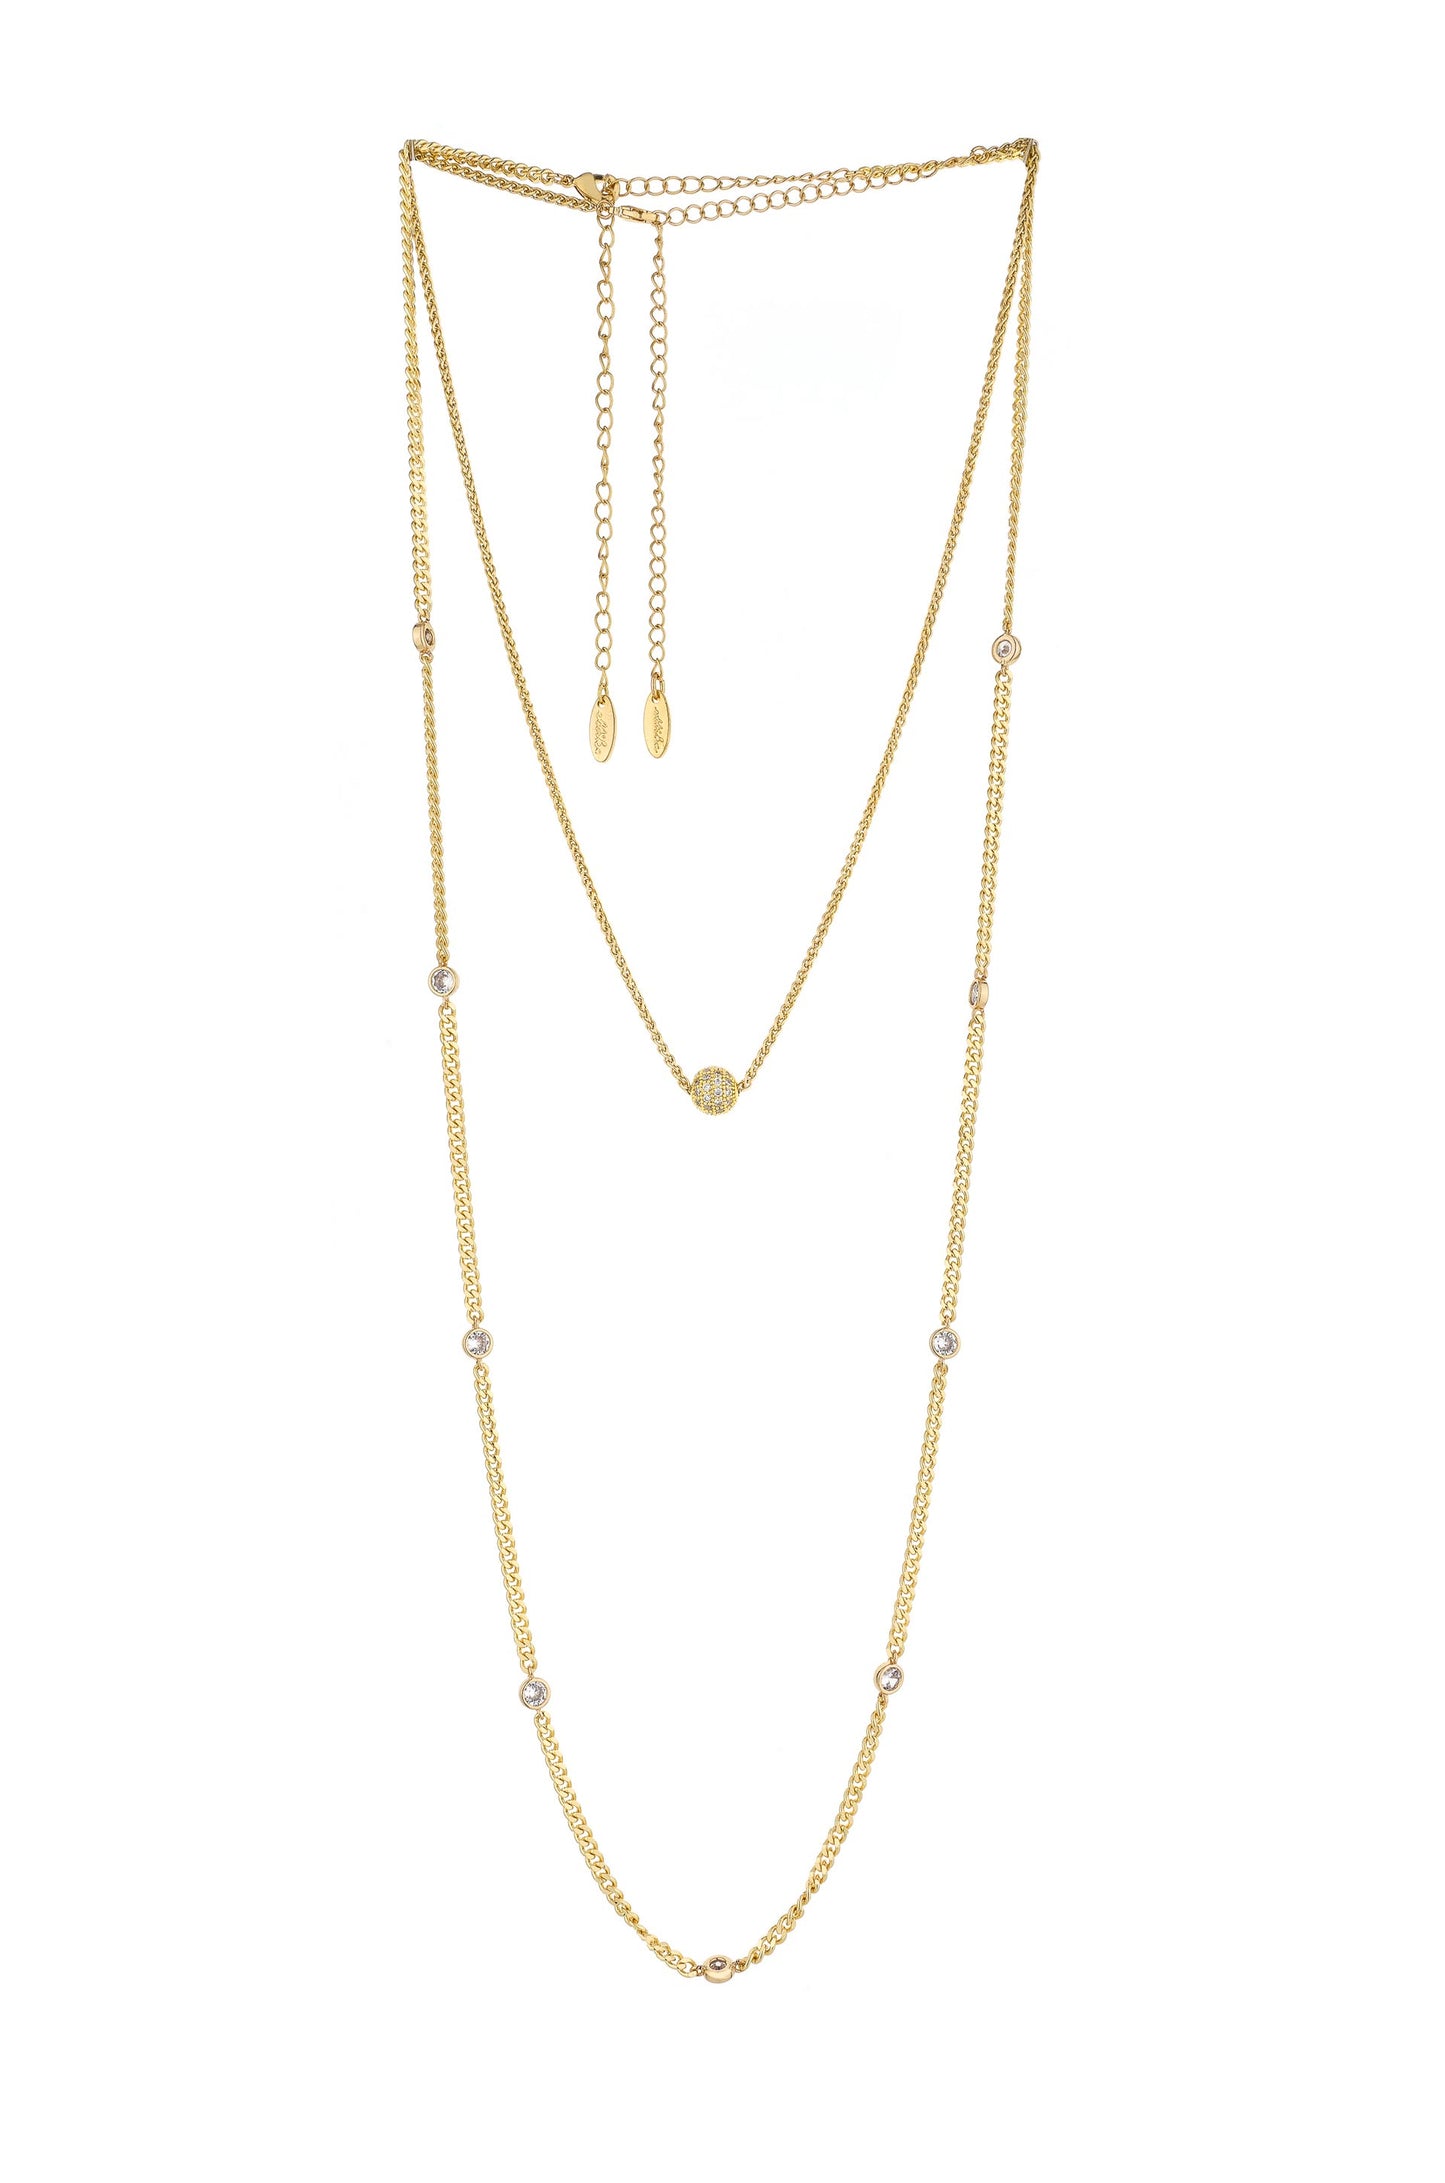 Crystal Society 18k Gold Plated Necklace Set on white background